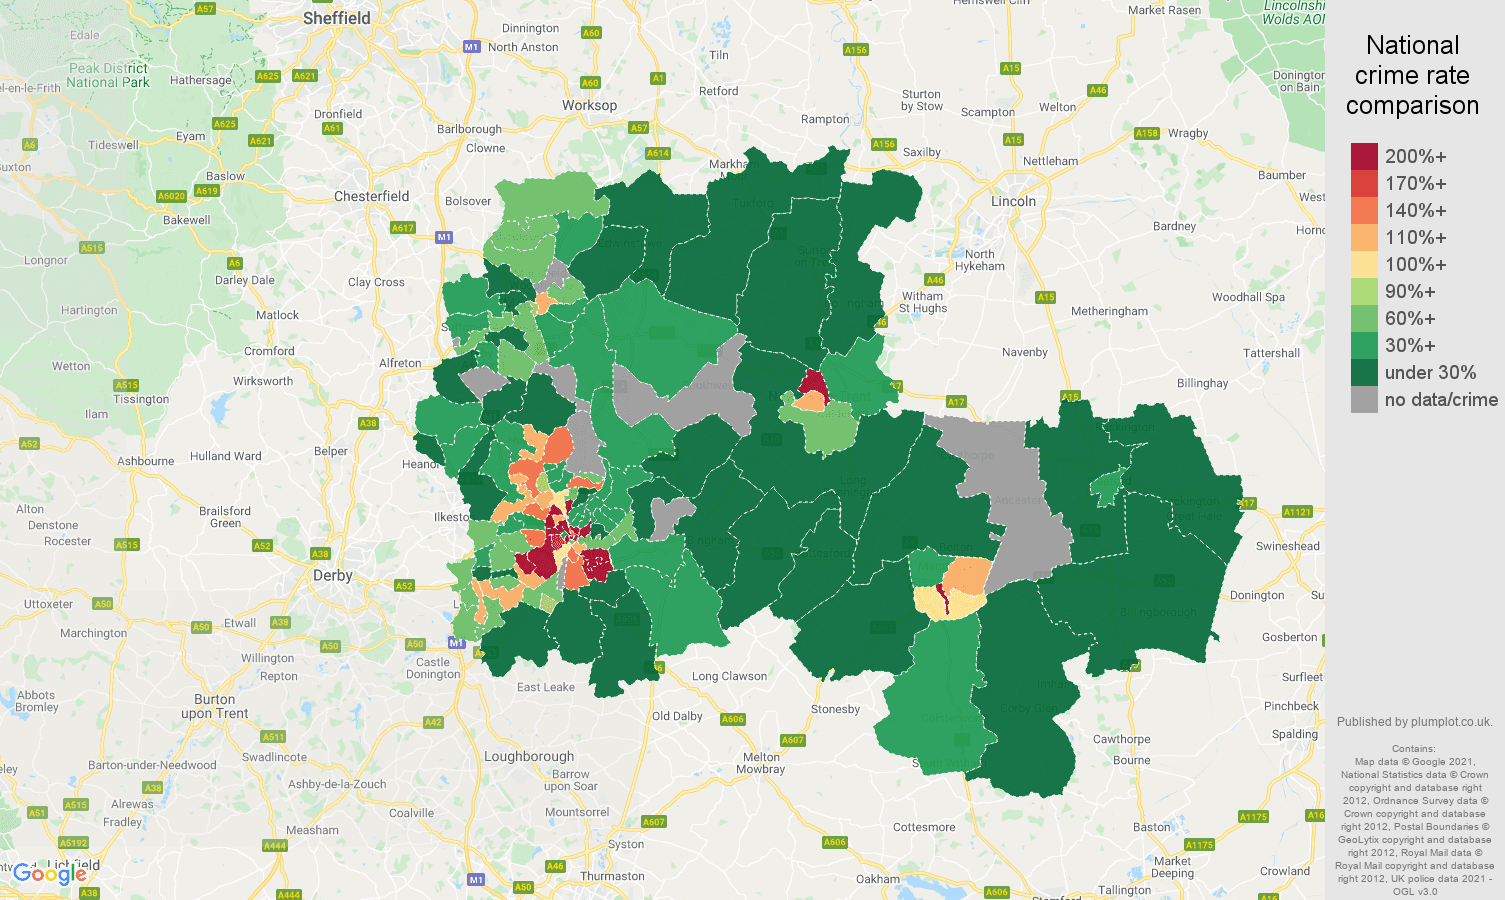 Nottingham bicycle theft crime rate comparison map